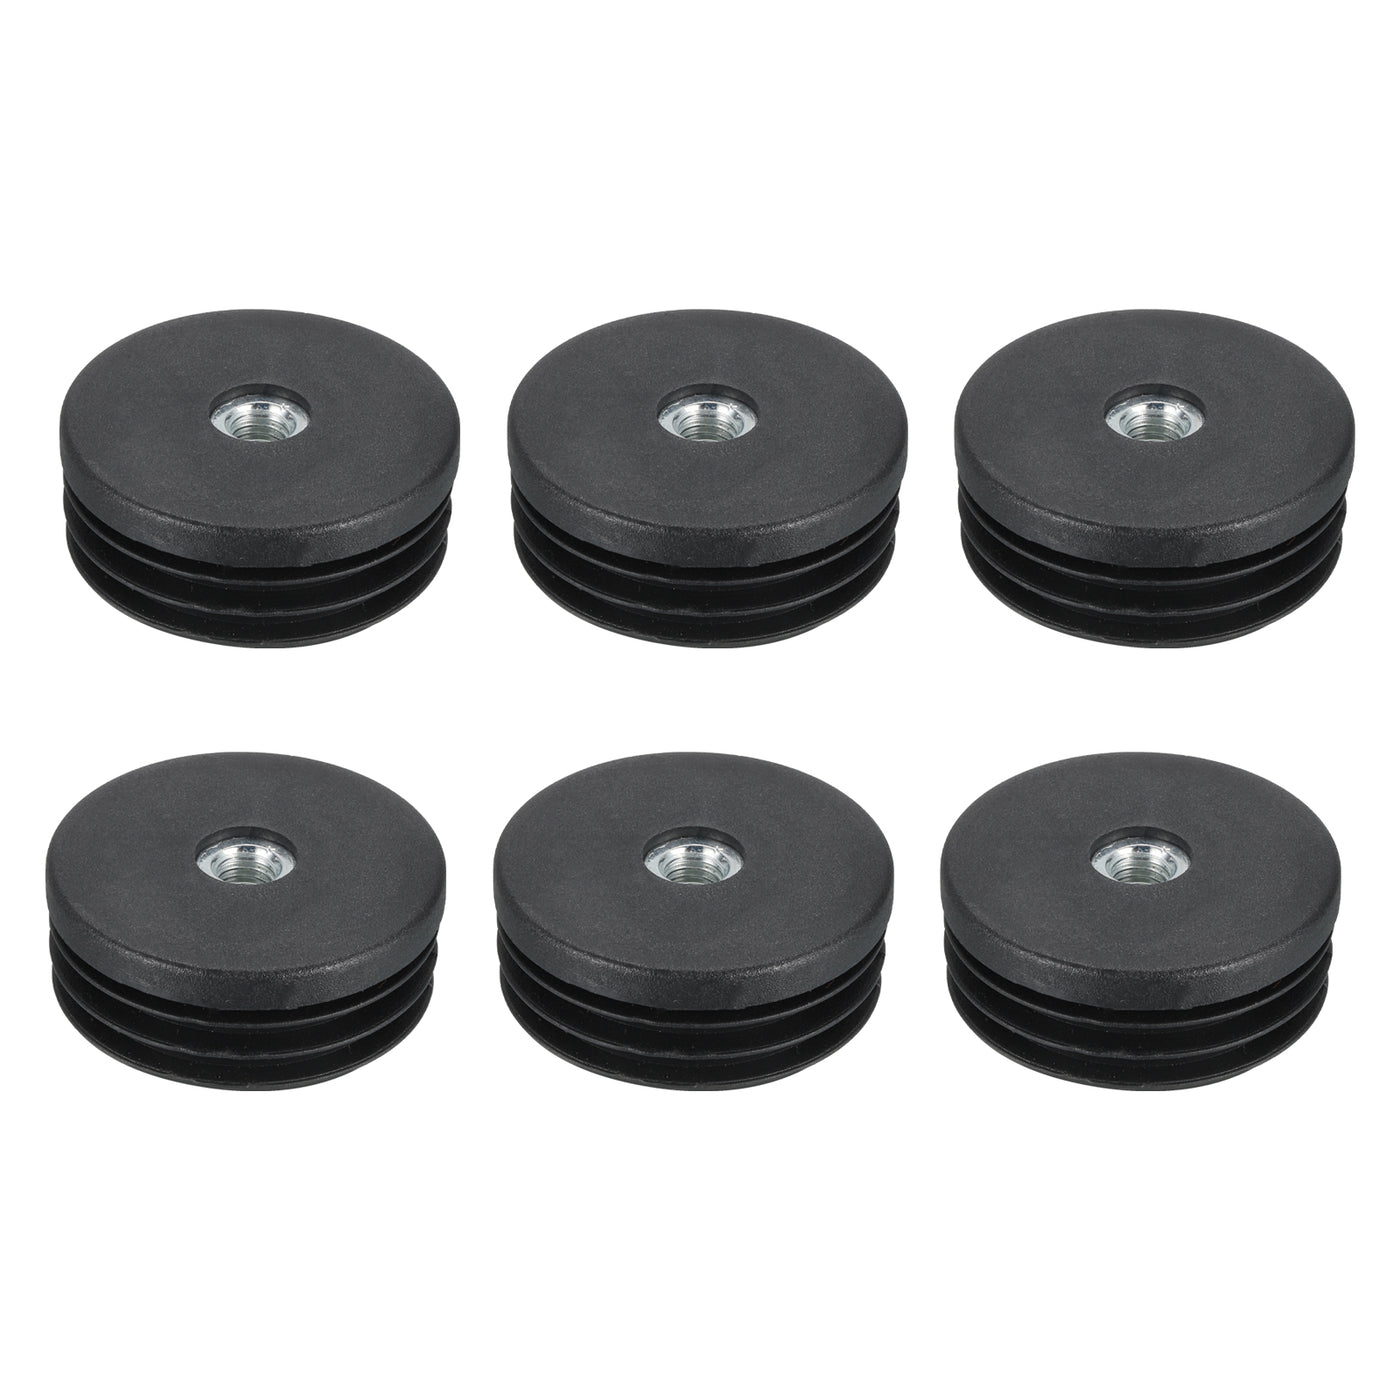 uxcell Uxcell 6Pcs Caster Insert with Thread, 50mm/1.97" M8 Thread for Furniture